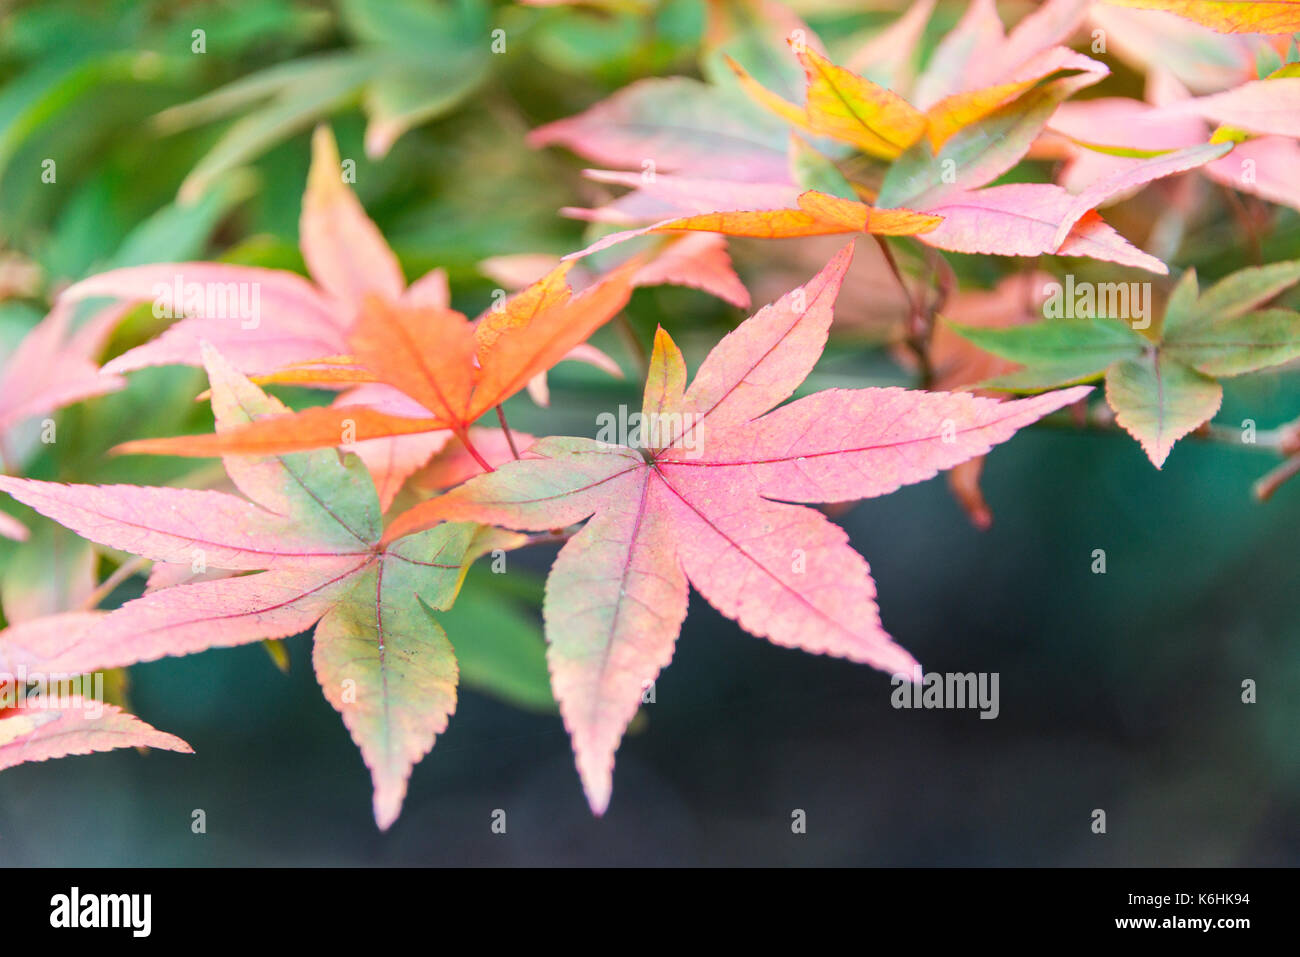 A close up of the leaves of a Chinese maple (Acer pauciflorum) in autumn Stock Photo